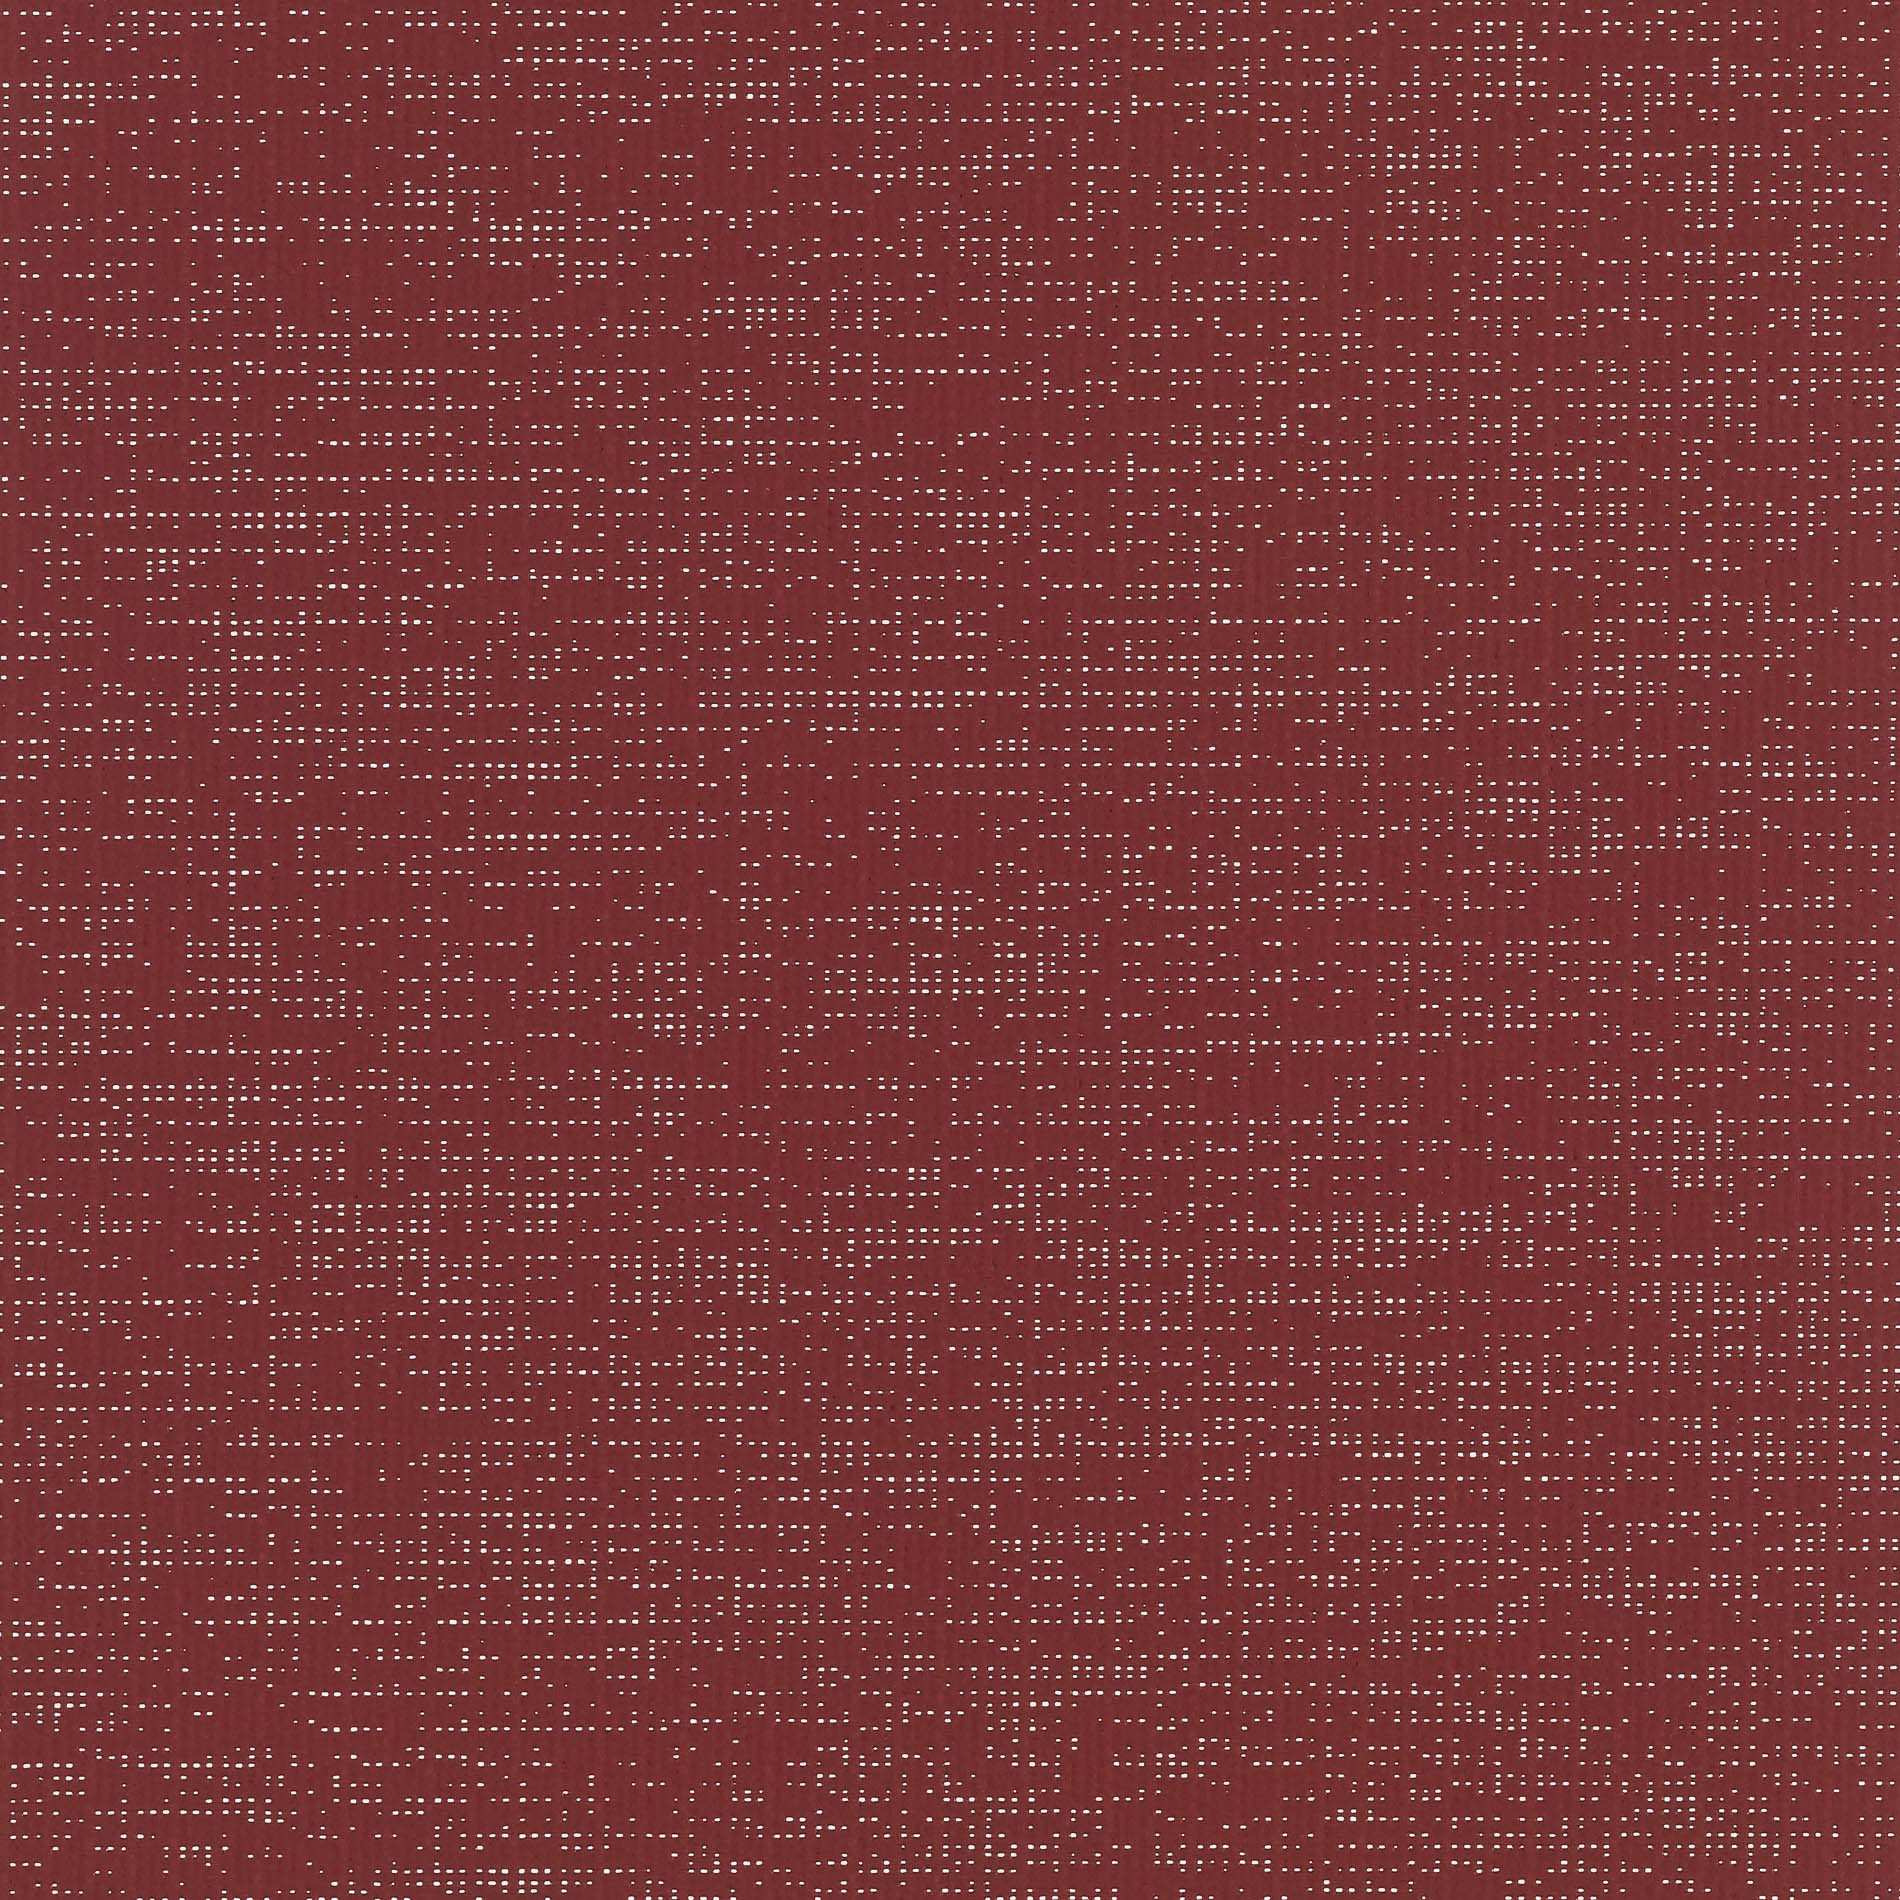 Altex - Fabric - SOLTIS PERFORM 92 - Deep red - 92-51181